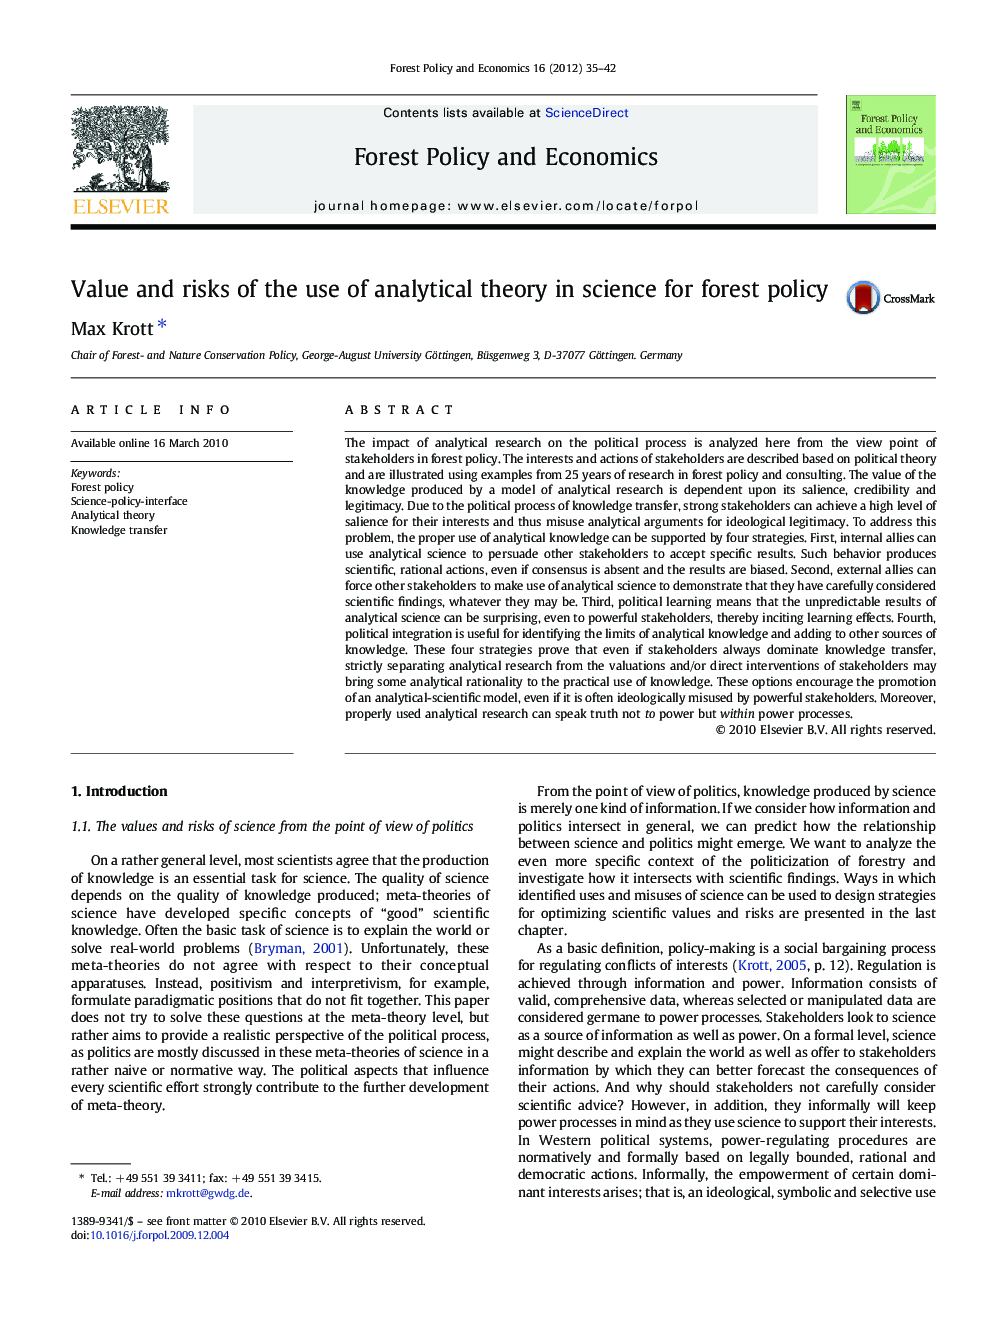 Value and risks of the use of analytical theory in science for forest policy